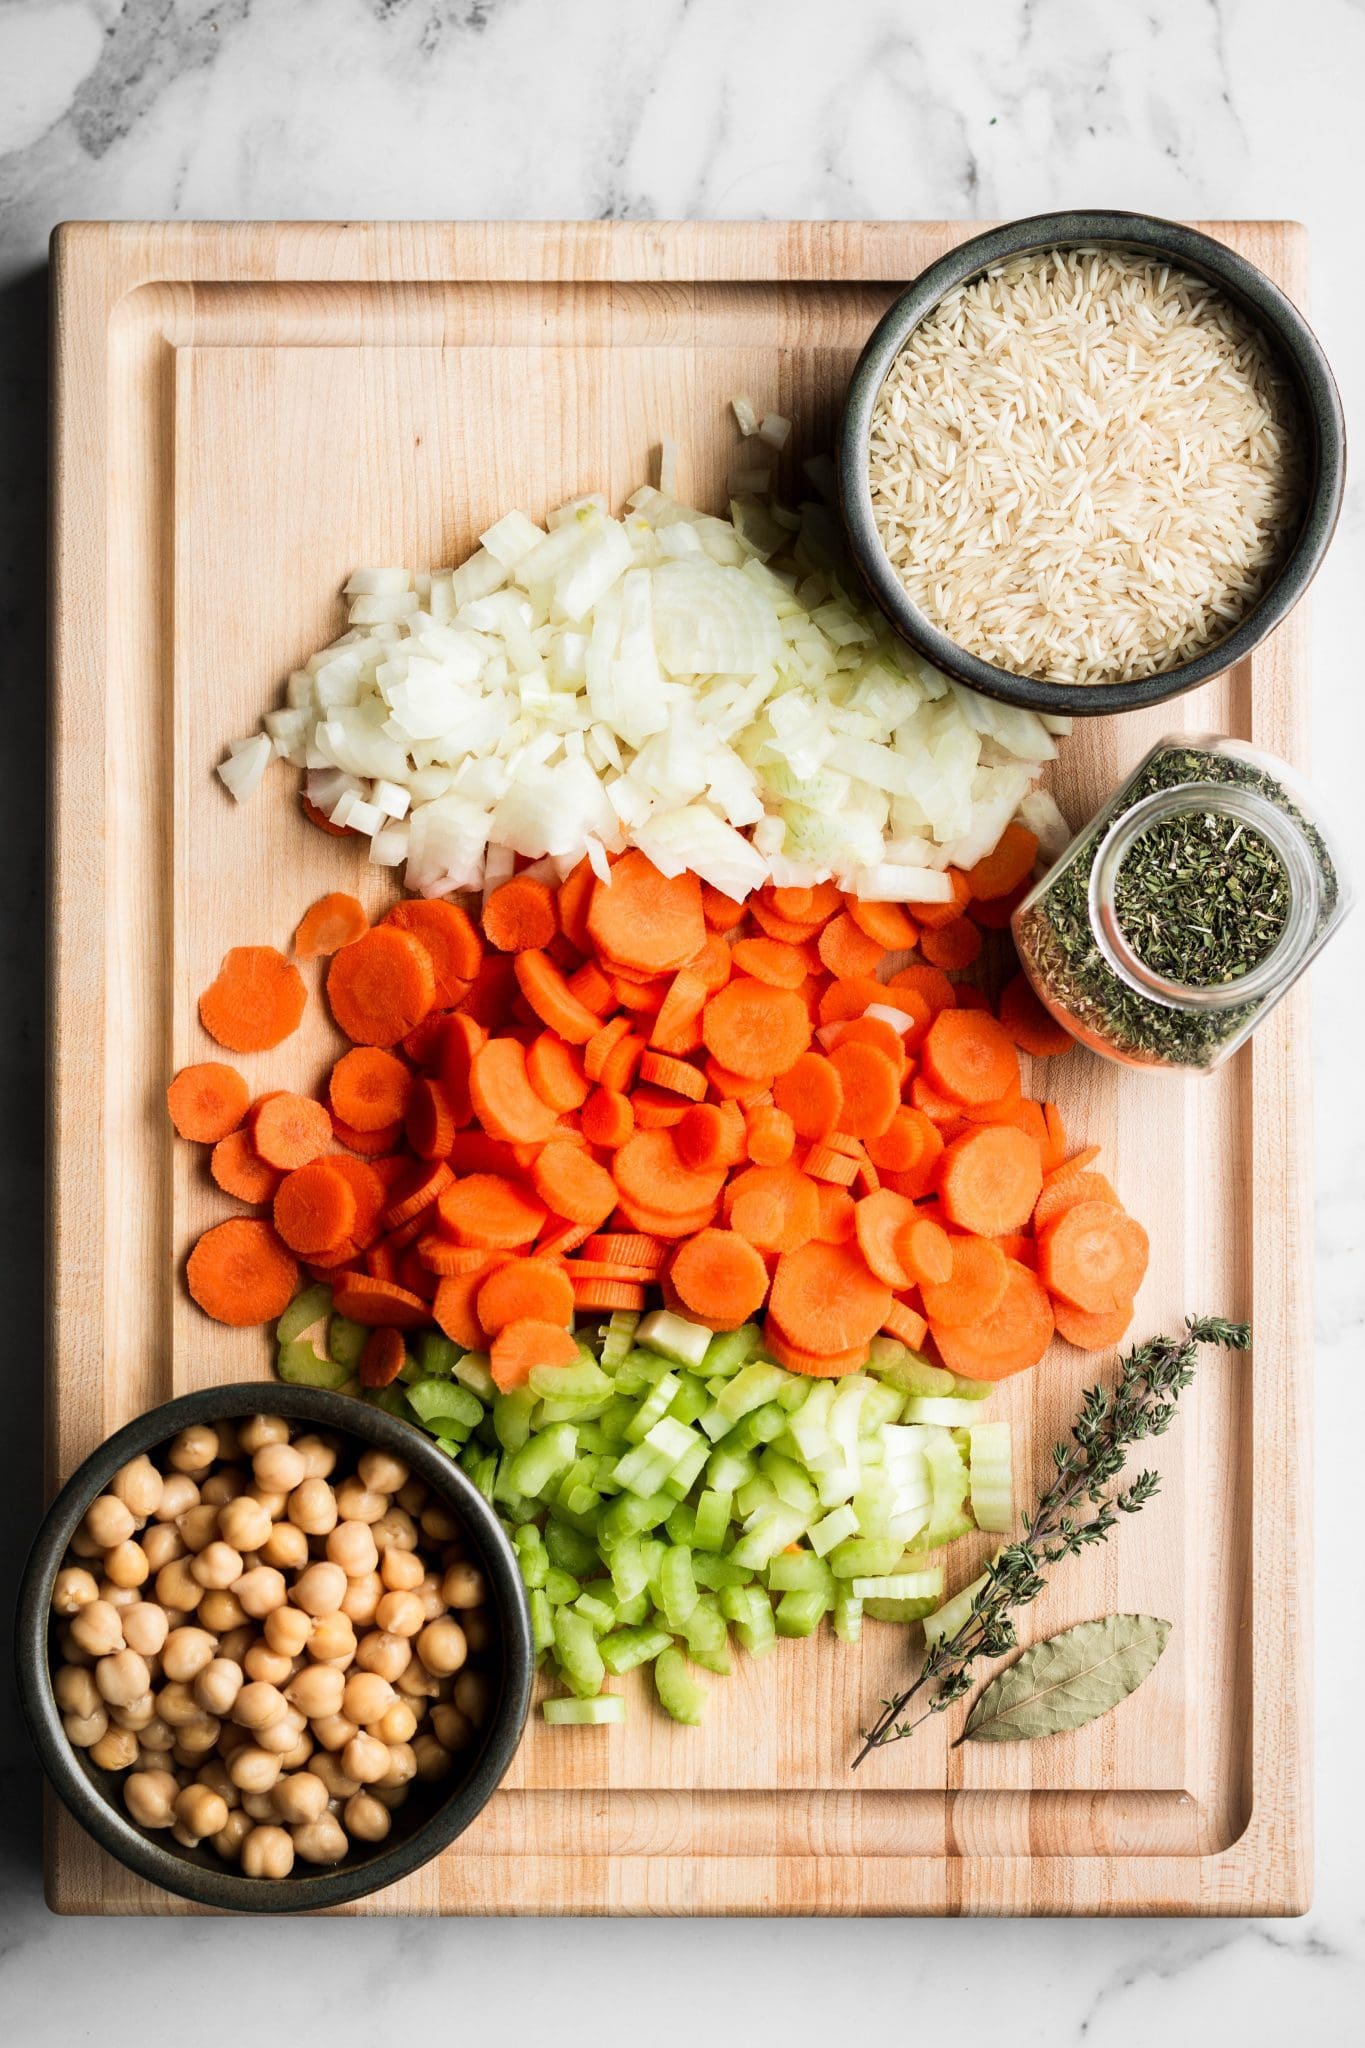 chopped celery, carrots and onions with chickpeas, rice and herbs on a cutting board